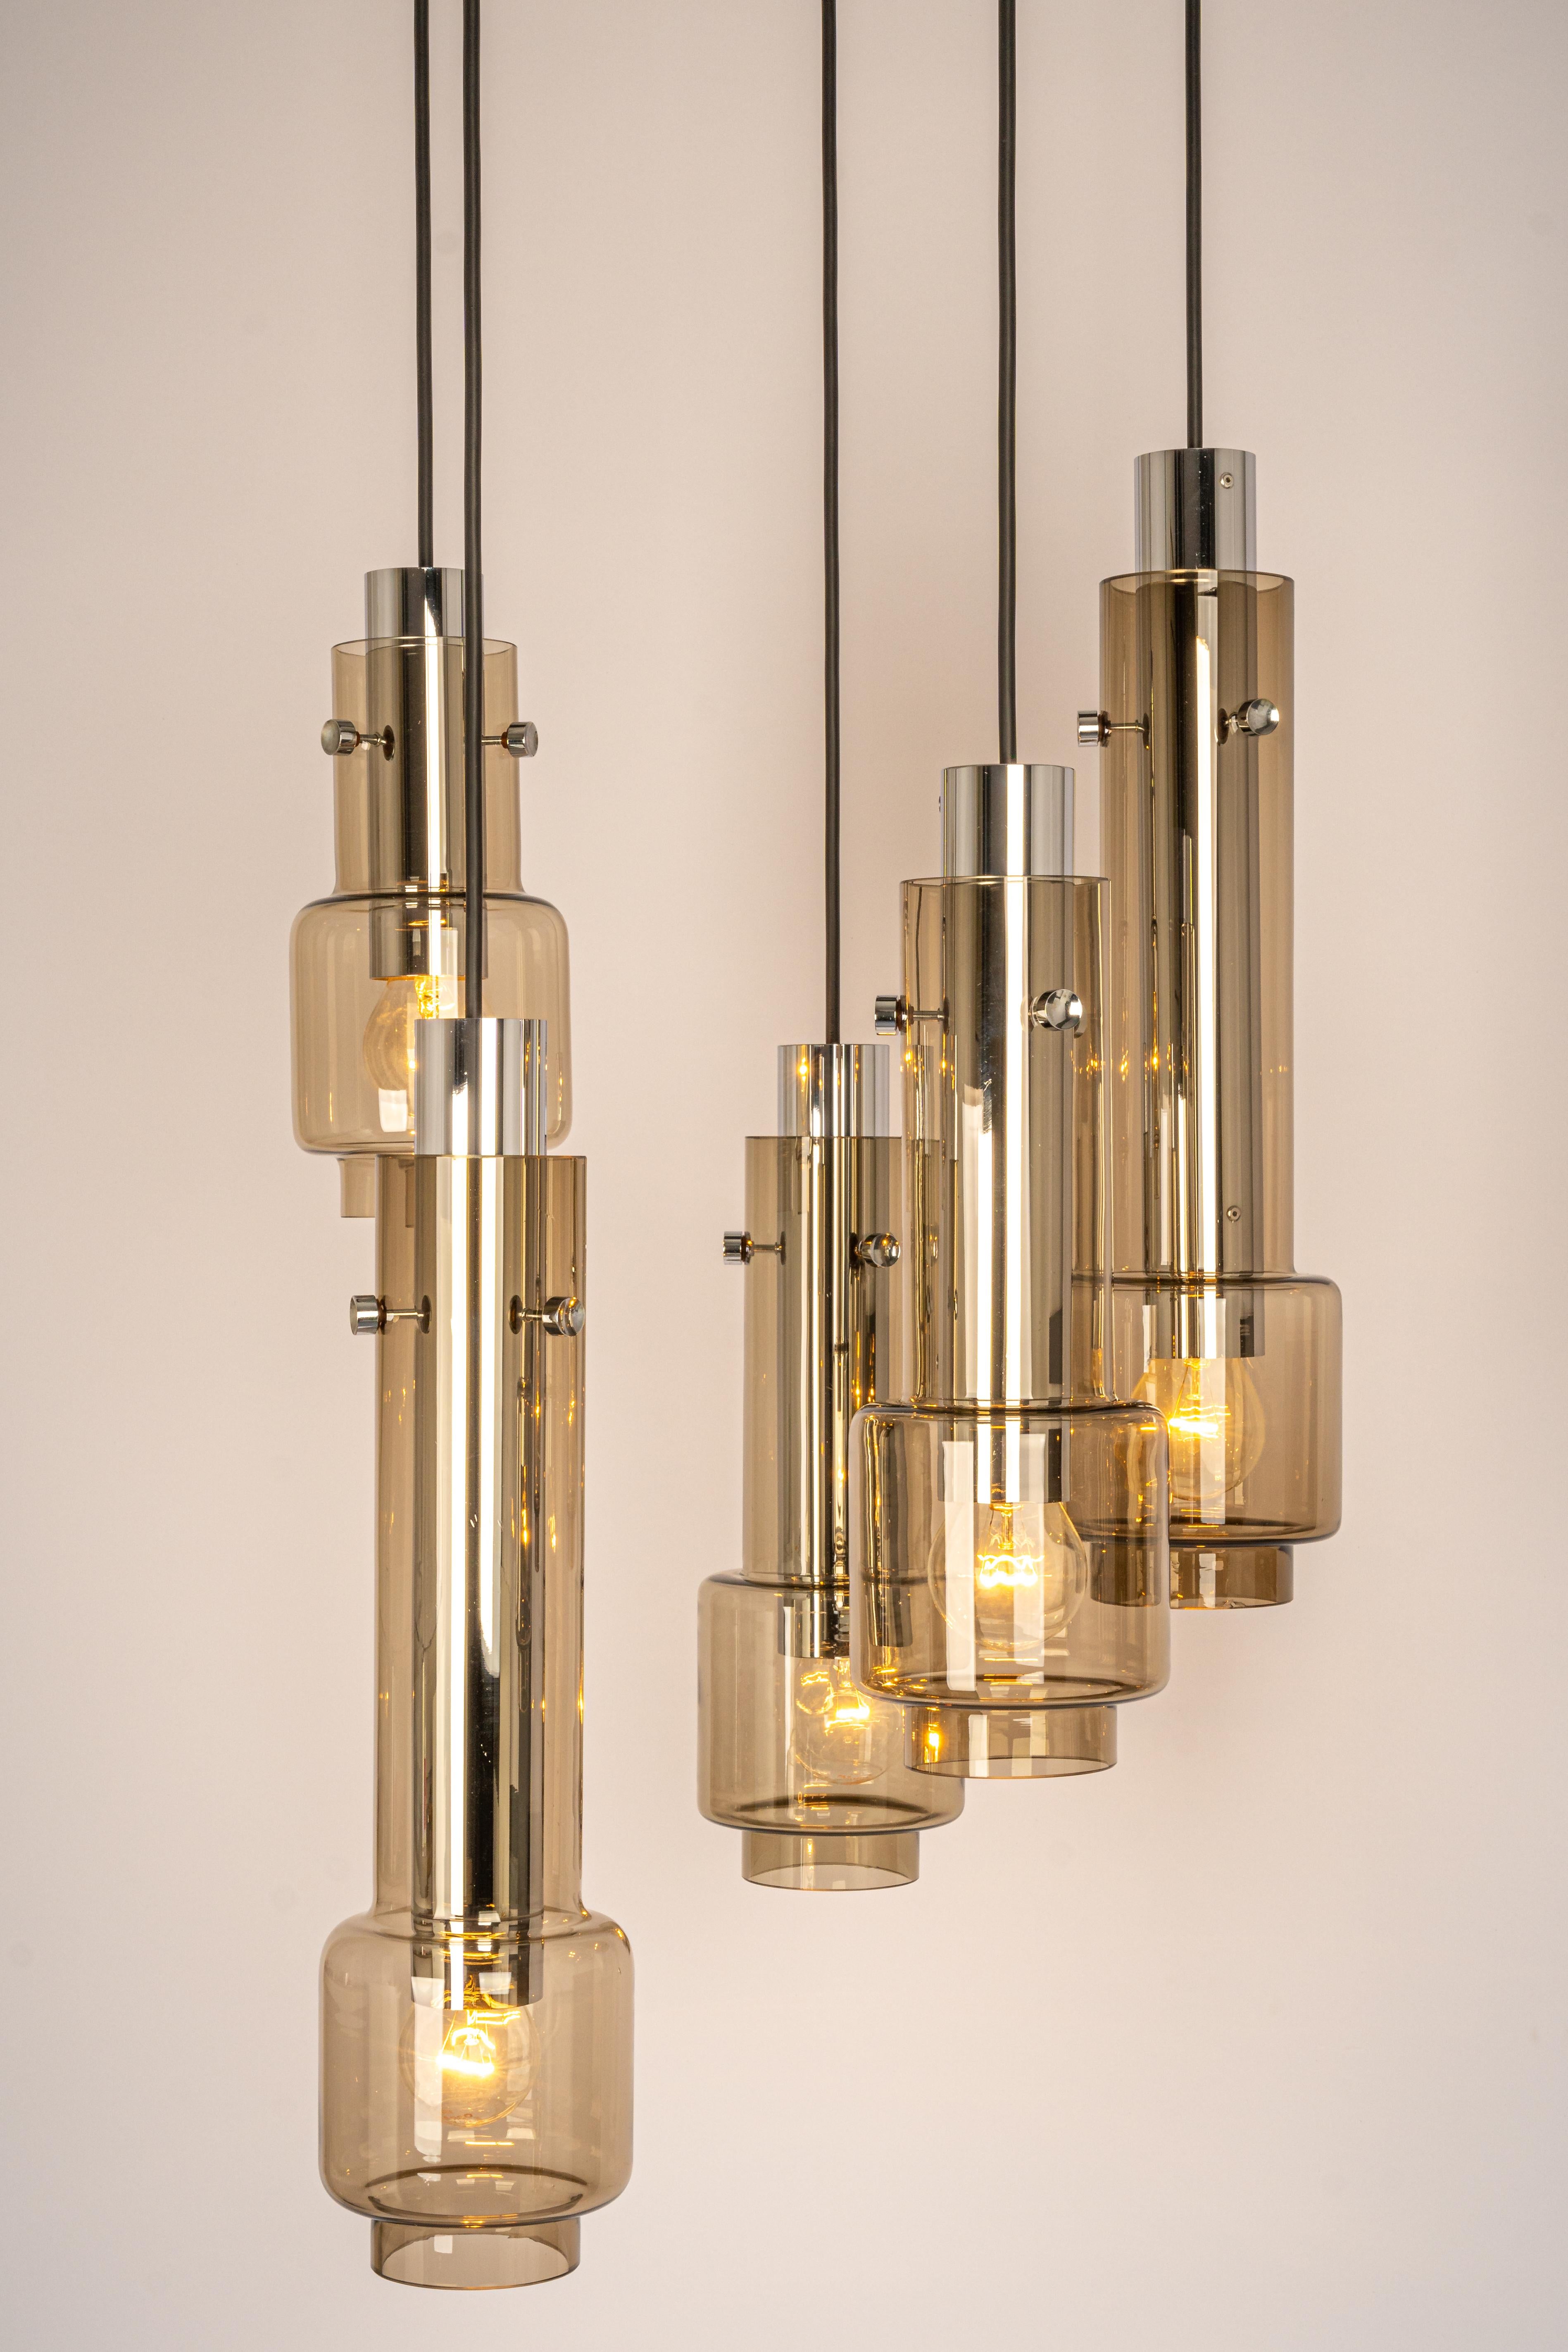 A special large cascading chandelier designed by Ott International Leuchten, manufactured in Germany, circa the 1970s with 5 smoked glasses on a chrome frame
Wonderful form and stunning light effect.
Sockets: 5 x E27 standard bulbs. (80 W max for